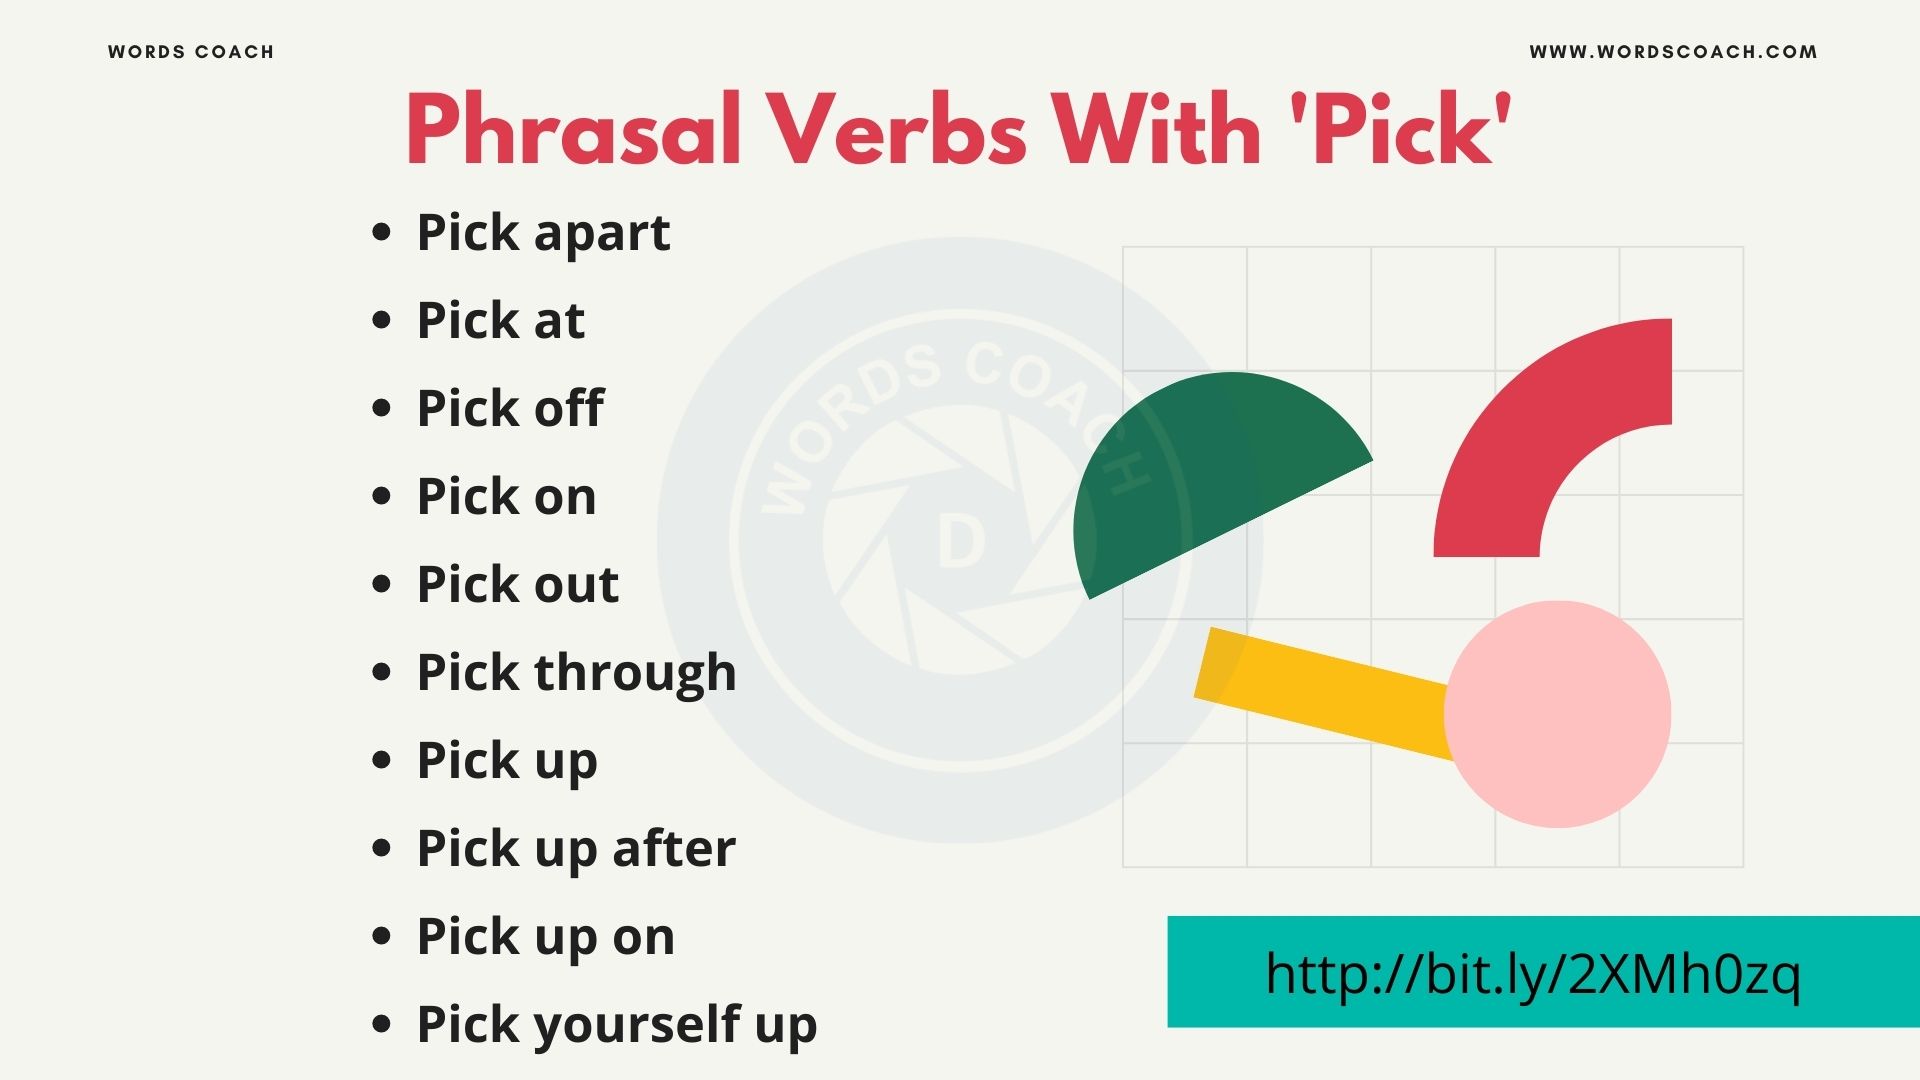 Phrasal Verbs With 'Pick'